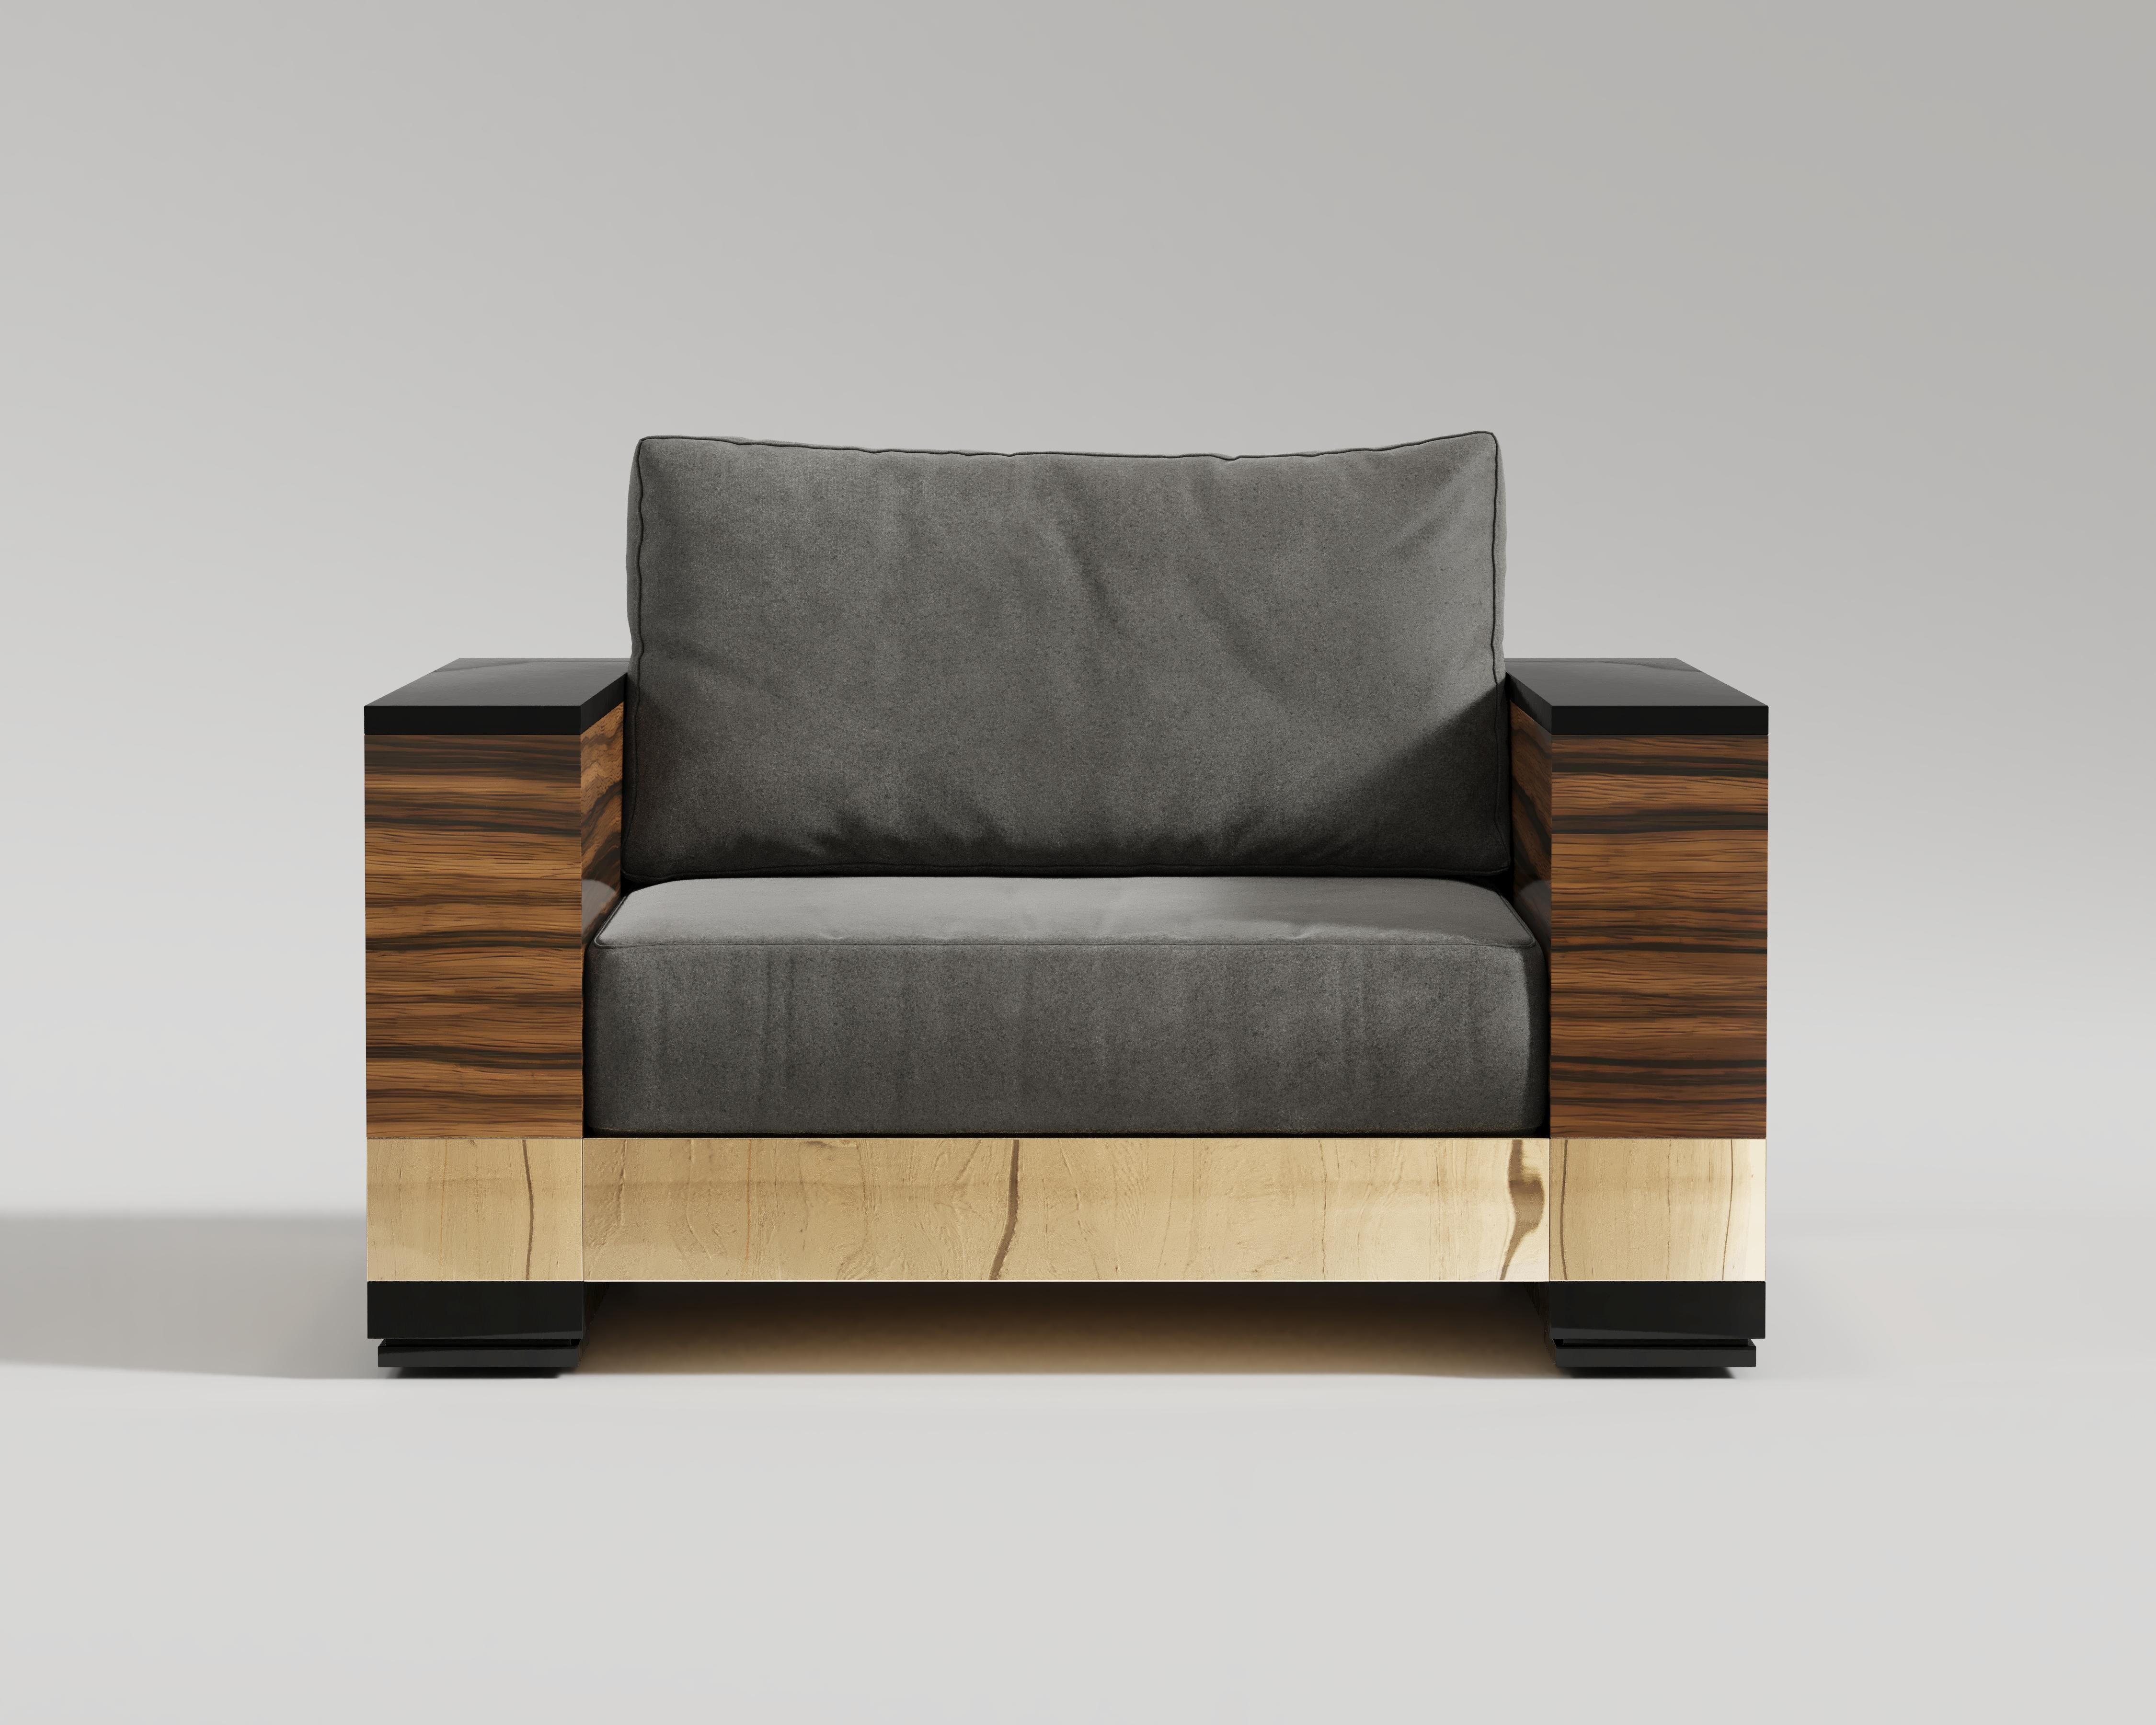 Giuseppe Sofa

The Giuseppe Sofa pictured here consists of a high-gloss H9 Base, topped with velvet fabric and an intrinsic bronze base. The Giuseppe Sofa bespoke ultimate comfort with its plush and inviting fabric.

Materials and sizes are